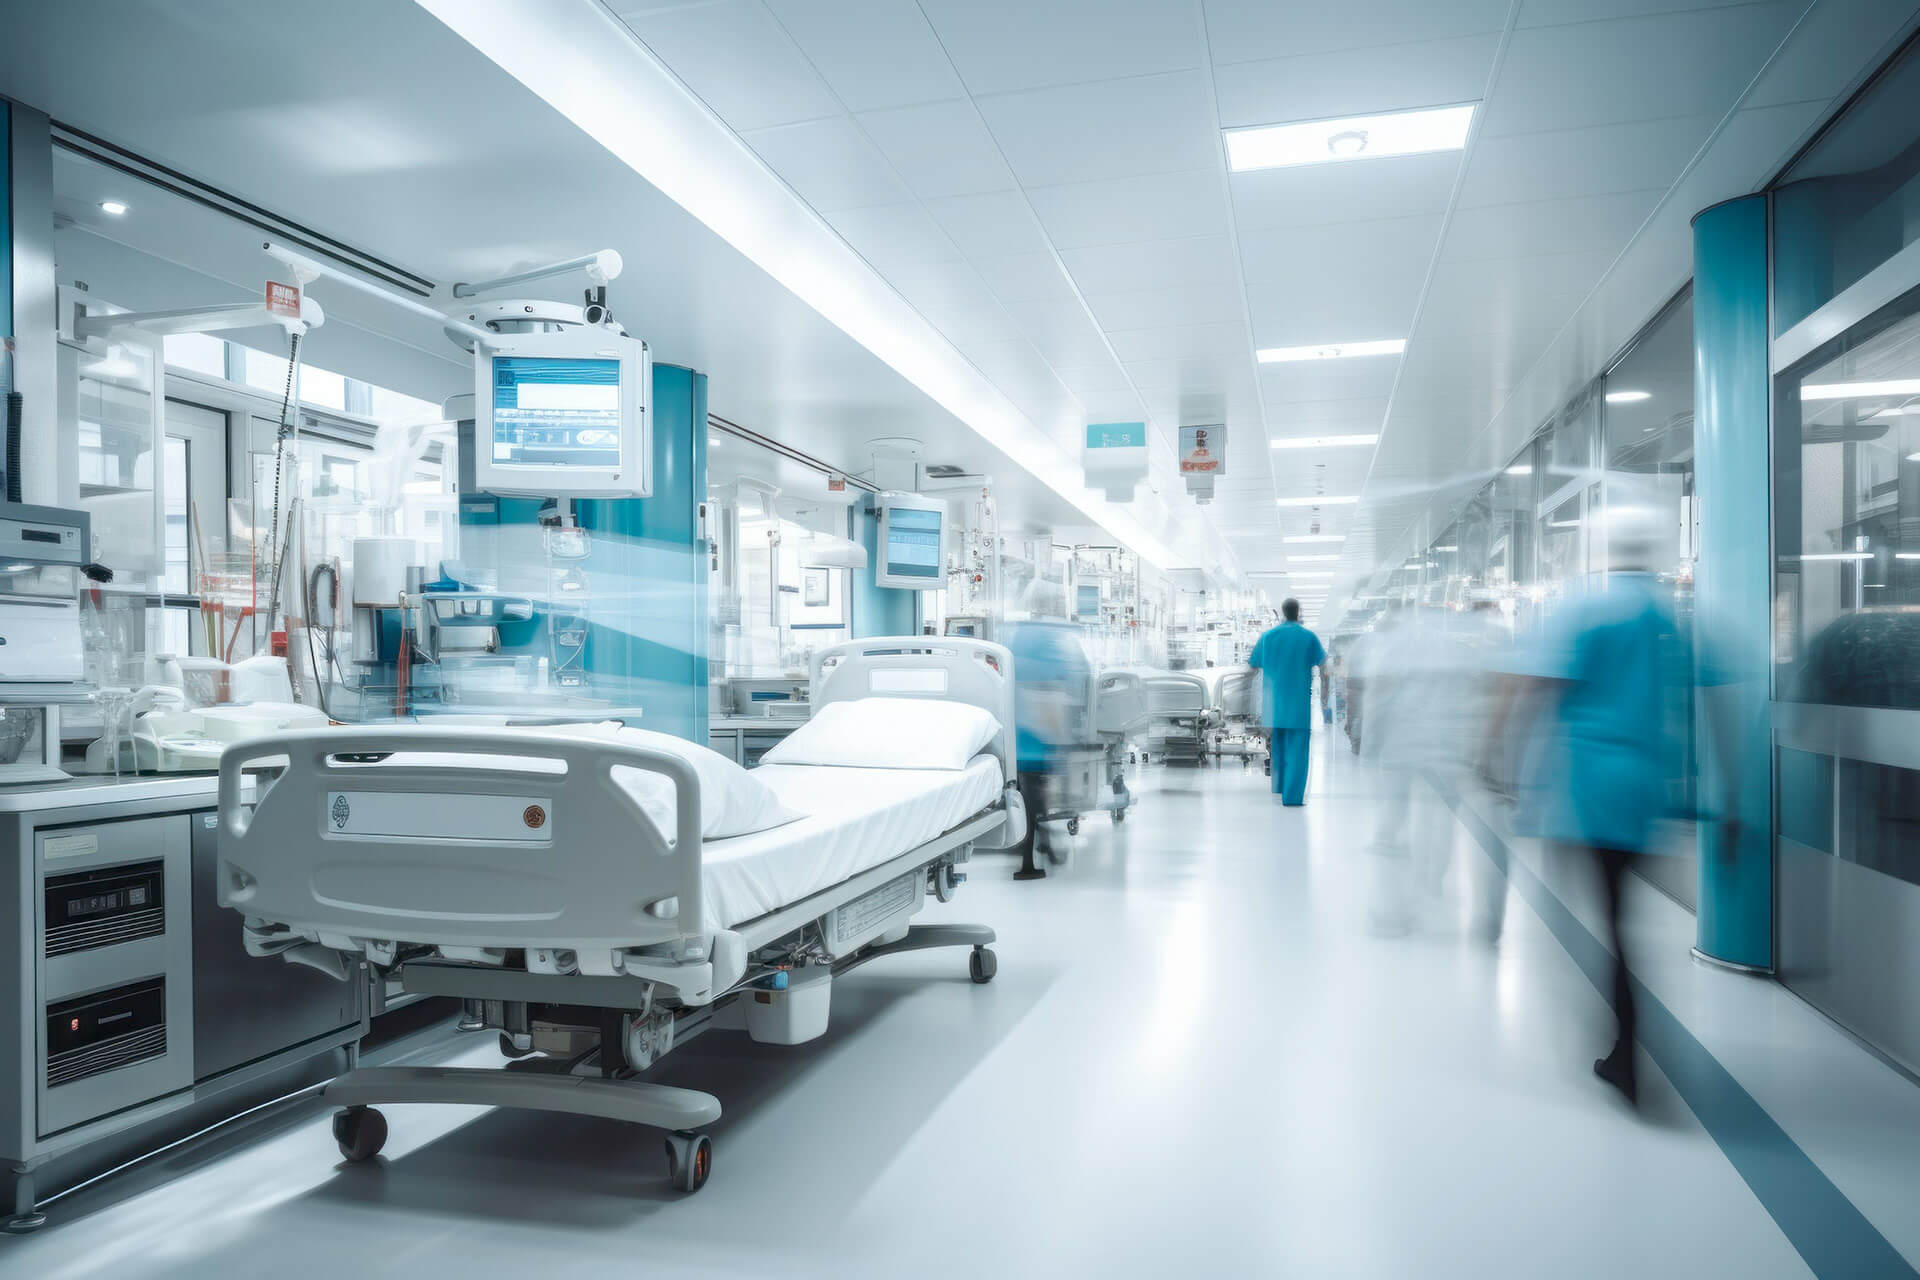 Uninterruptible Power Supply Systems play a key role in preserving life and operational efficiency in hospital environments